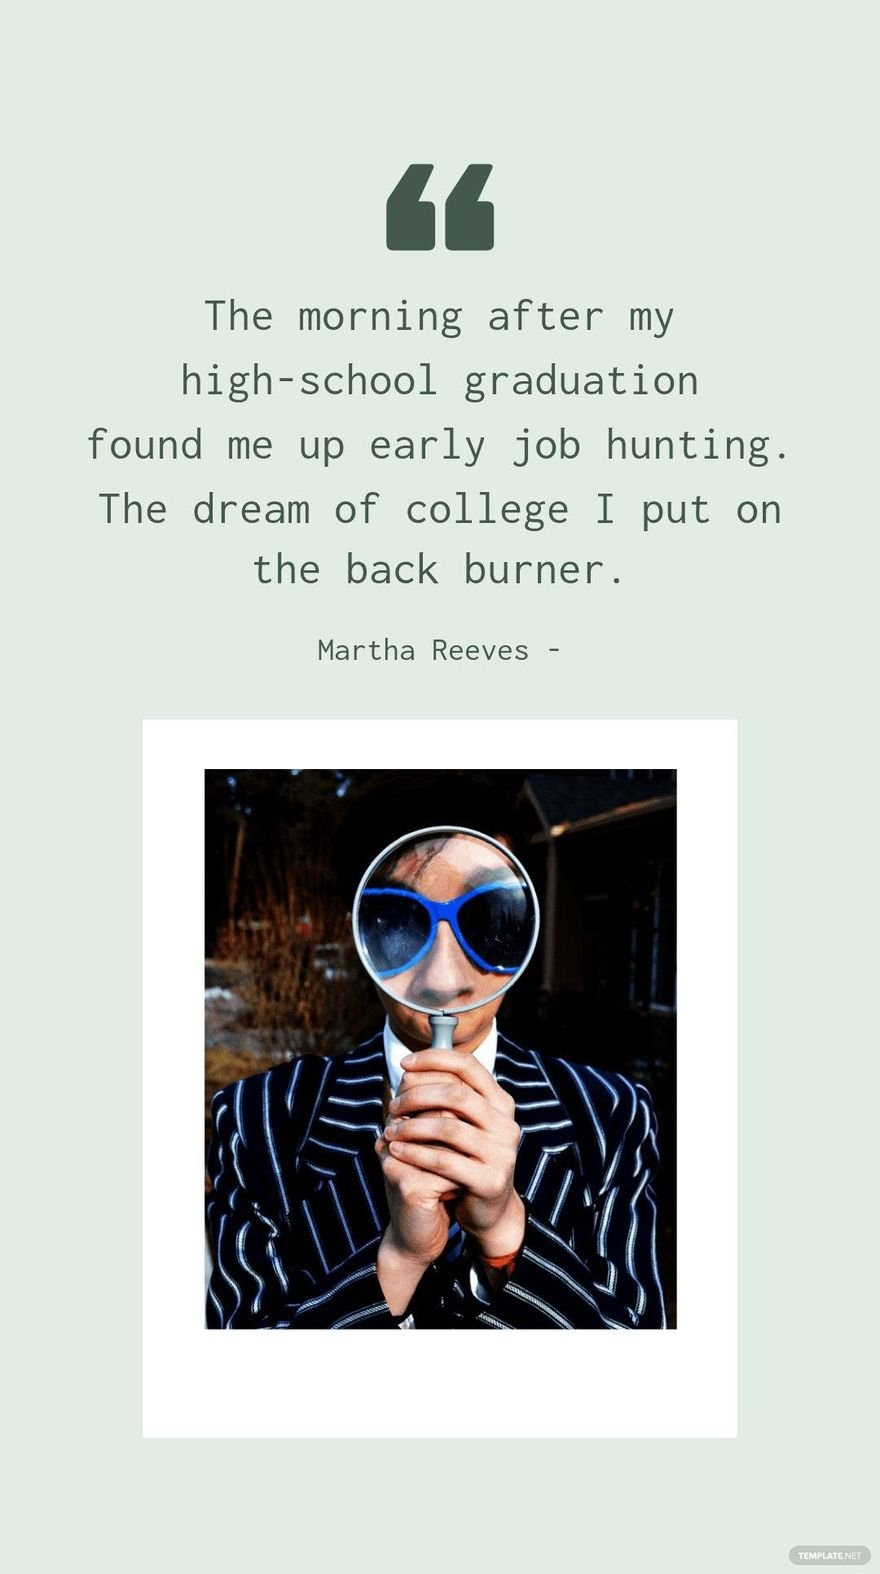 Free Martha Reeves - The morning after my high-school graduation found me up early job hunting. The dream of college I put on the back burner. in JPG